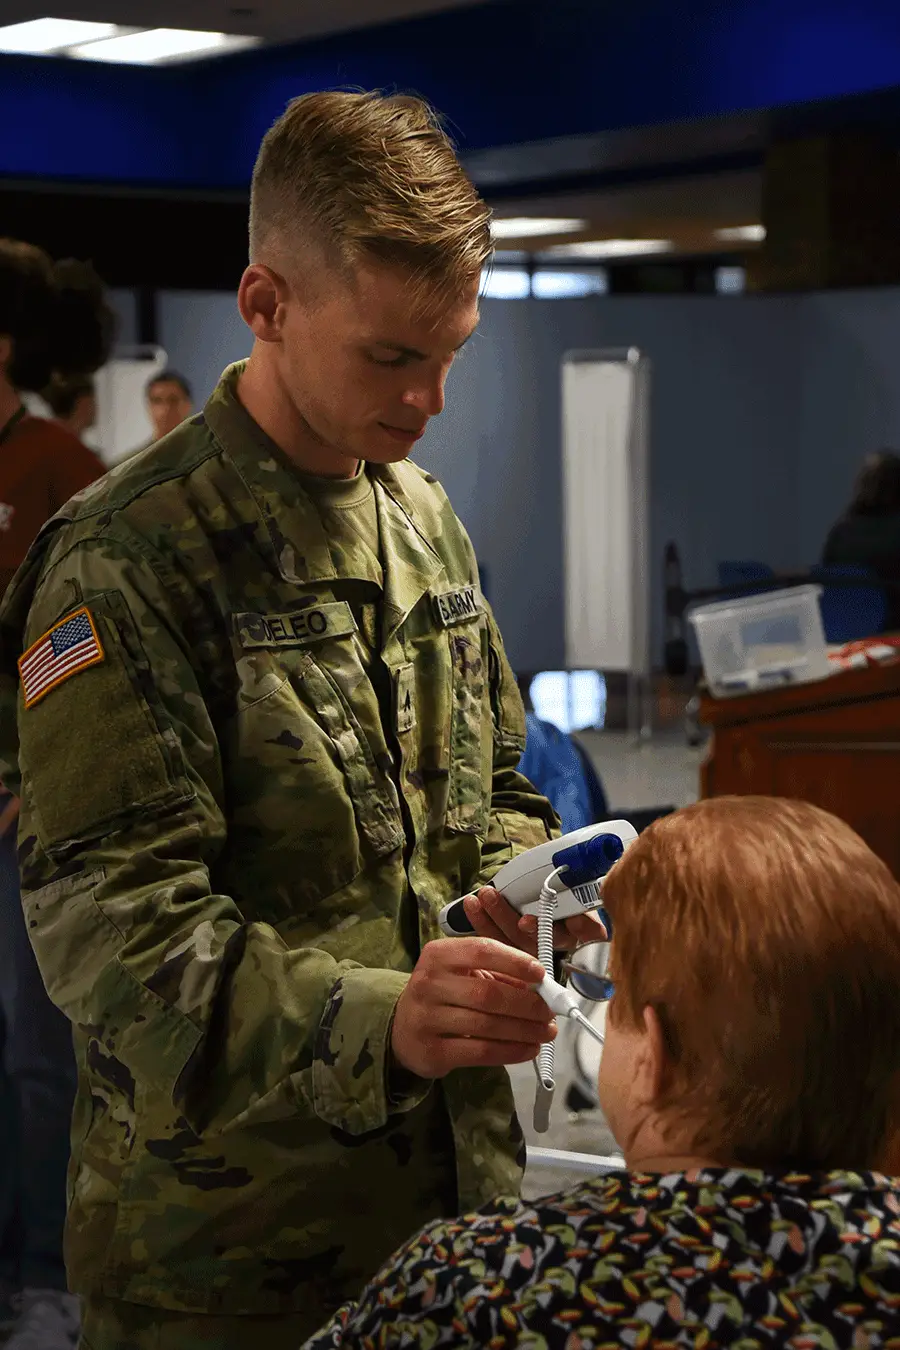 GuardCare 2019 helps citizens in eastern Ohio